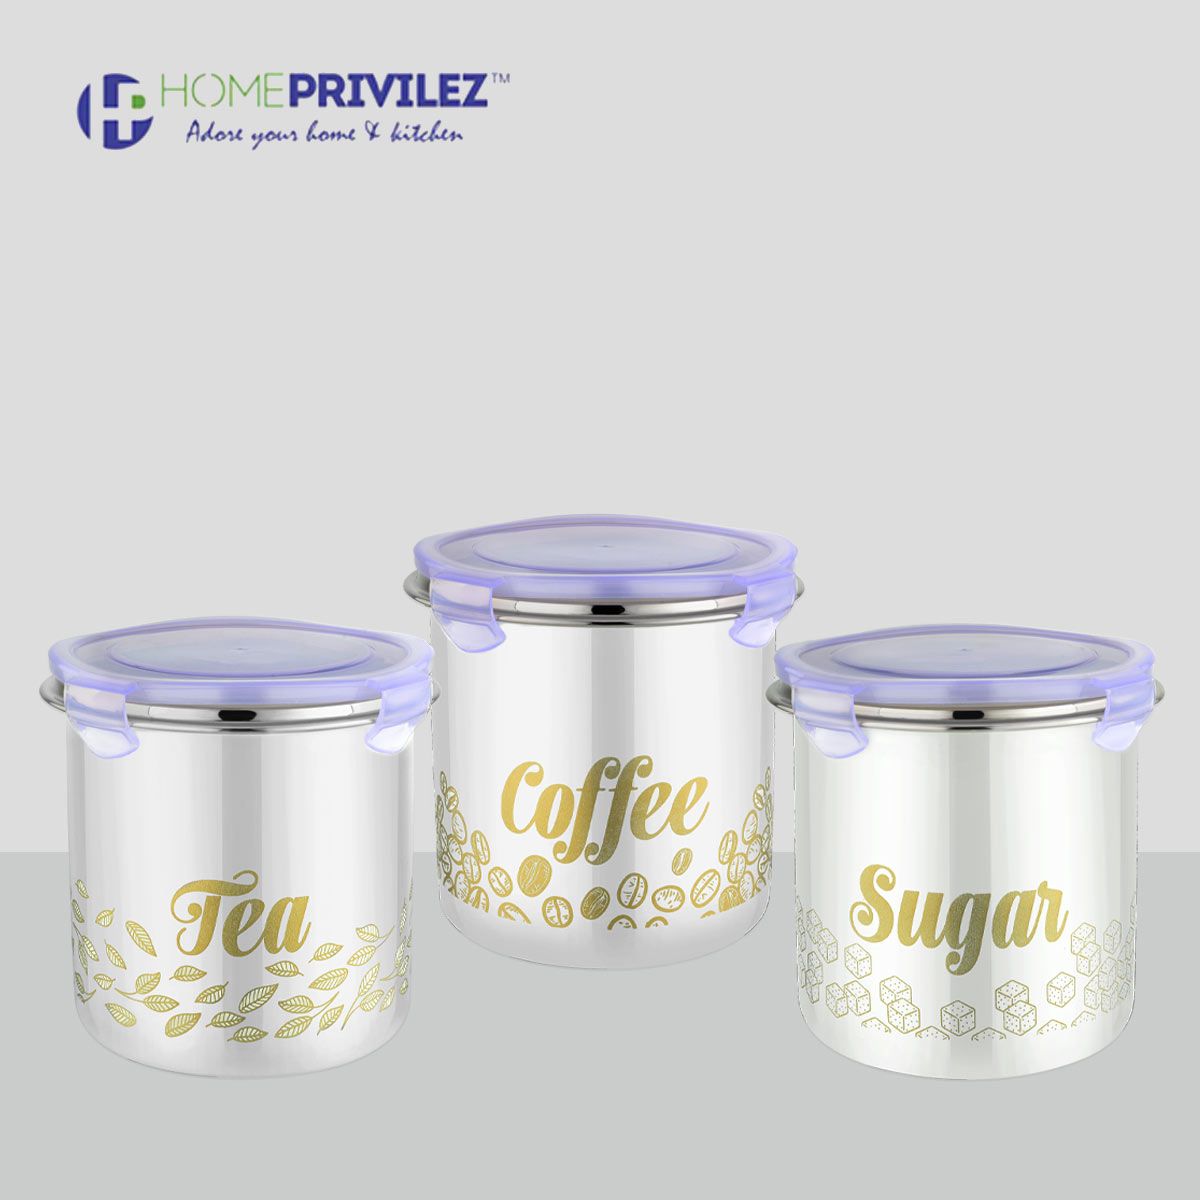 “Flip & Seal “Stainless Steel Air Tight Storage Container- Tea, Coffee & Sugar Set of 3 in white colour(1000mLx3)